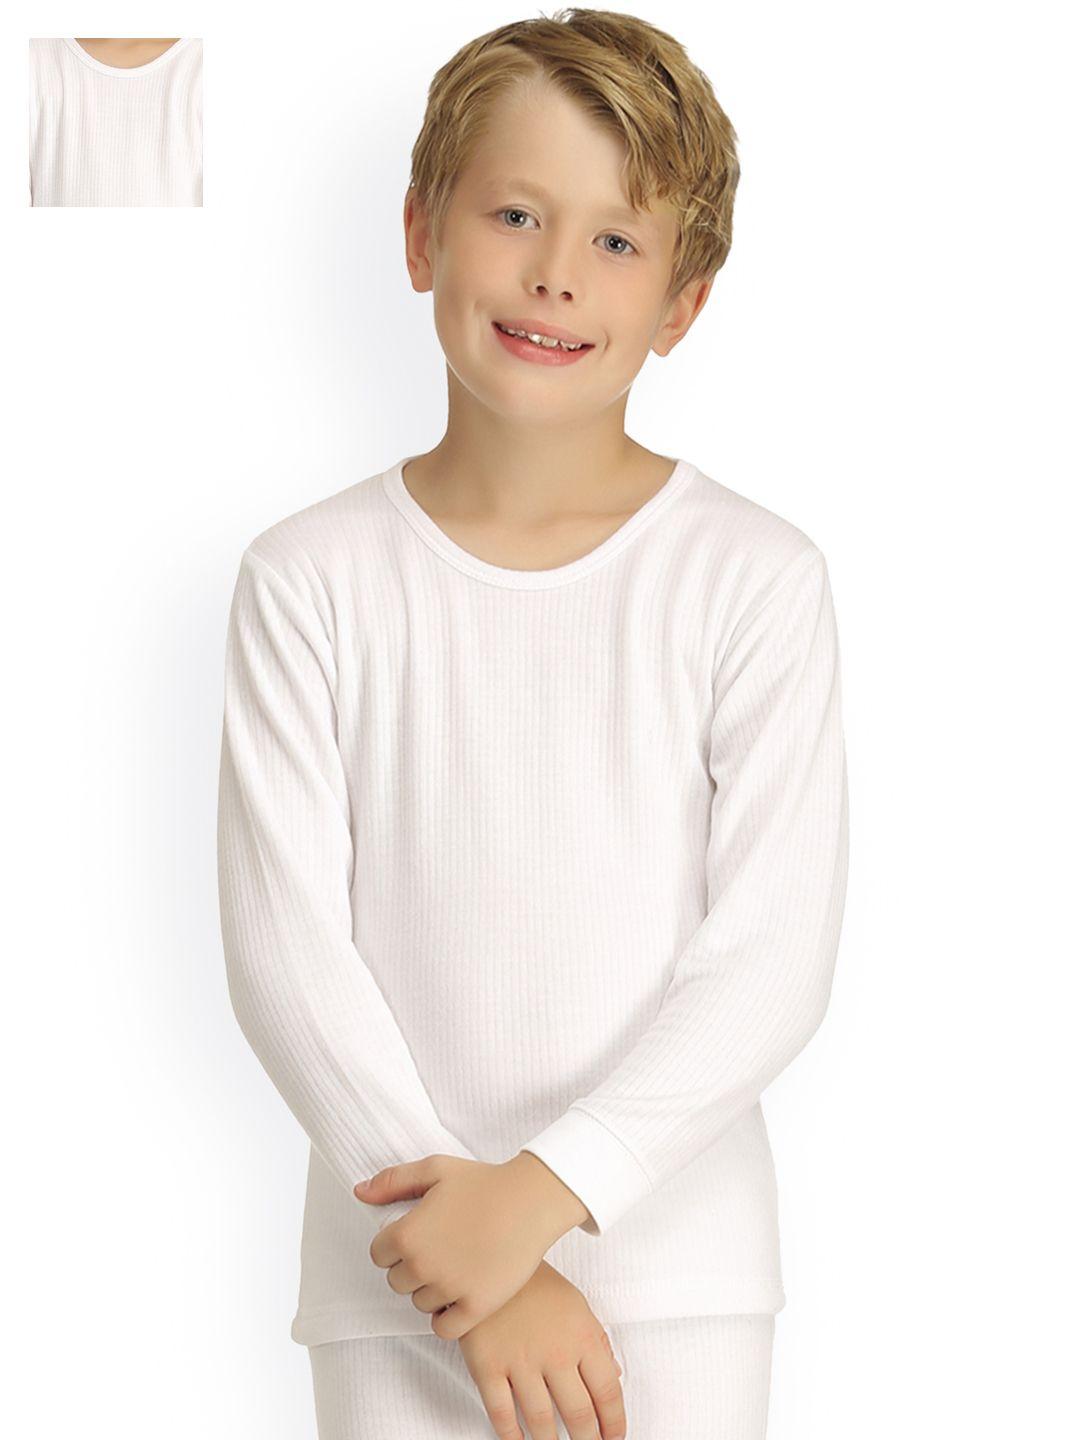 kanvin-pack-of-2-white-thermal-t-shirt-2340w2340